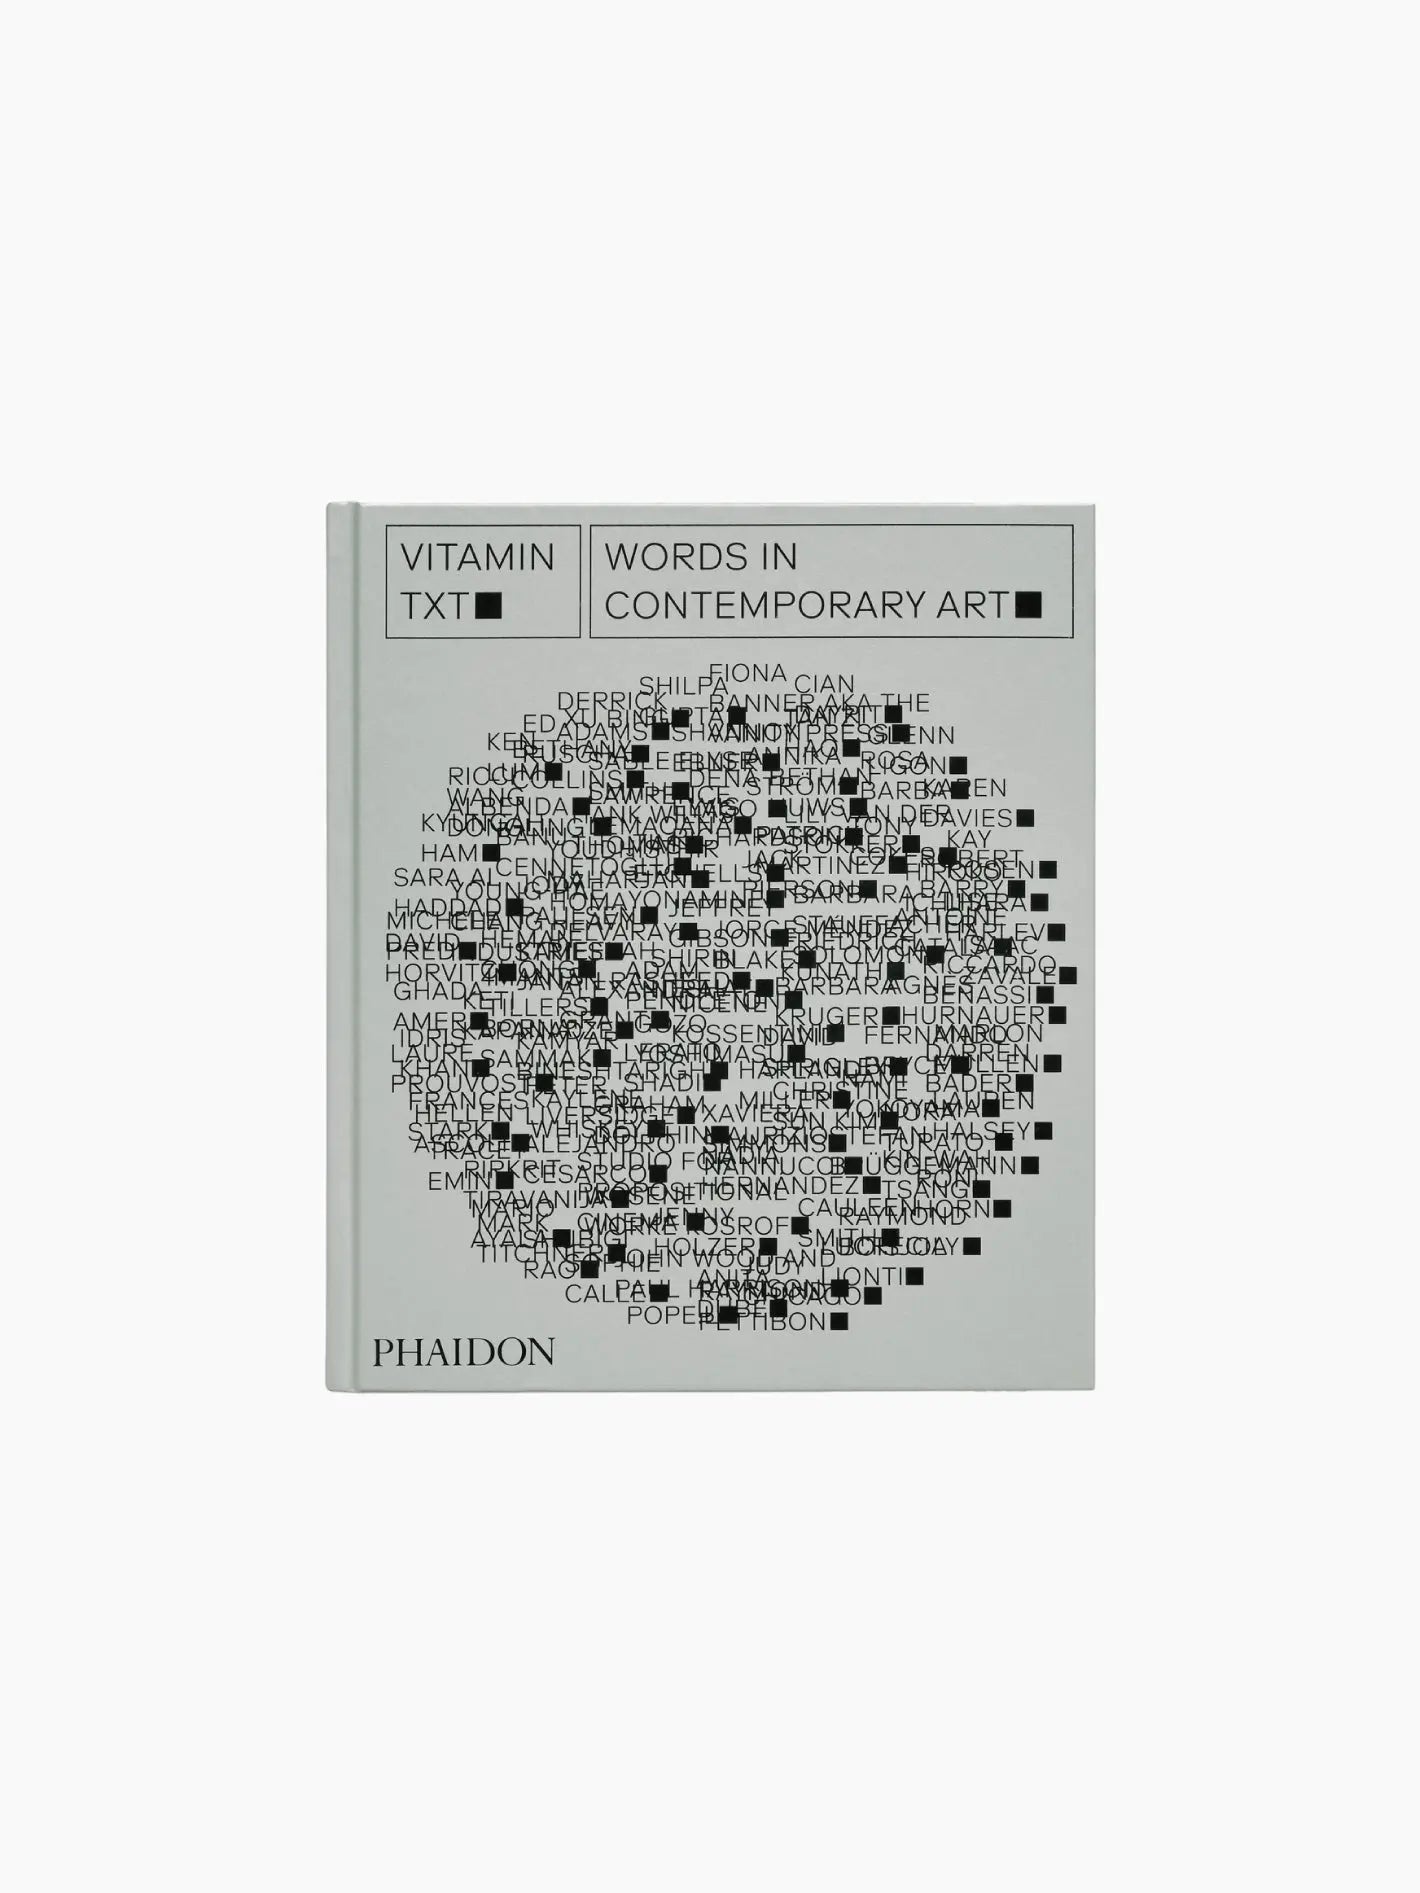 A book titled "Vitamin Txt: Words in Contemporary Art" published by Phaidon. The cover, reminiscent of the vibrant streets of Barcelona, features a circular arrangement of numerous overlapping names and words in black text, creating a dense, textured pattern on a light grey background.